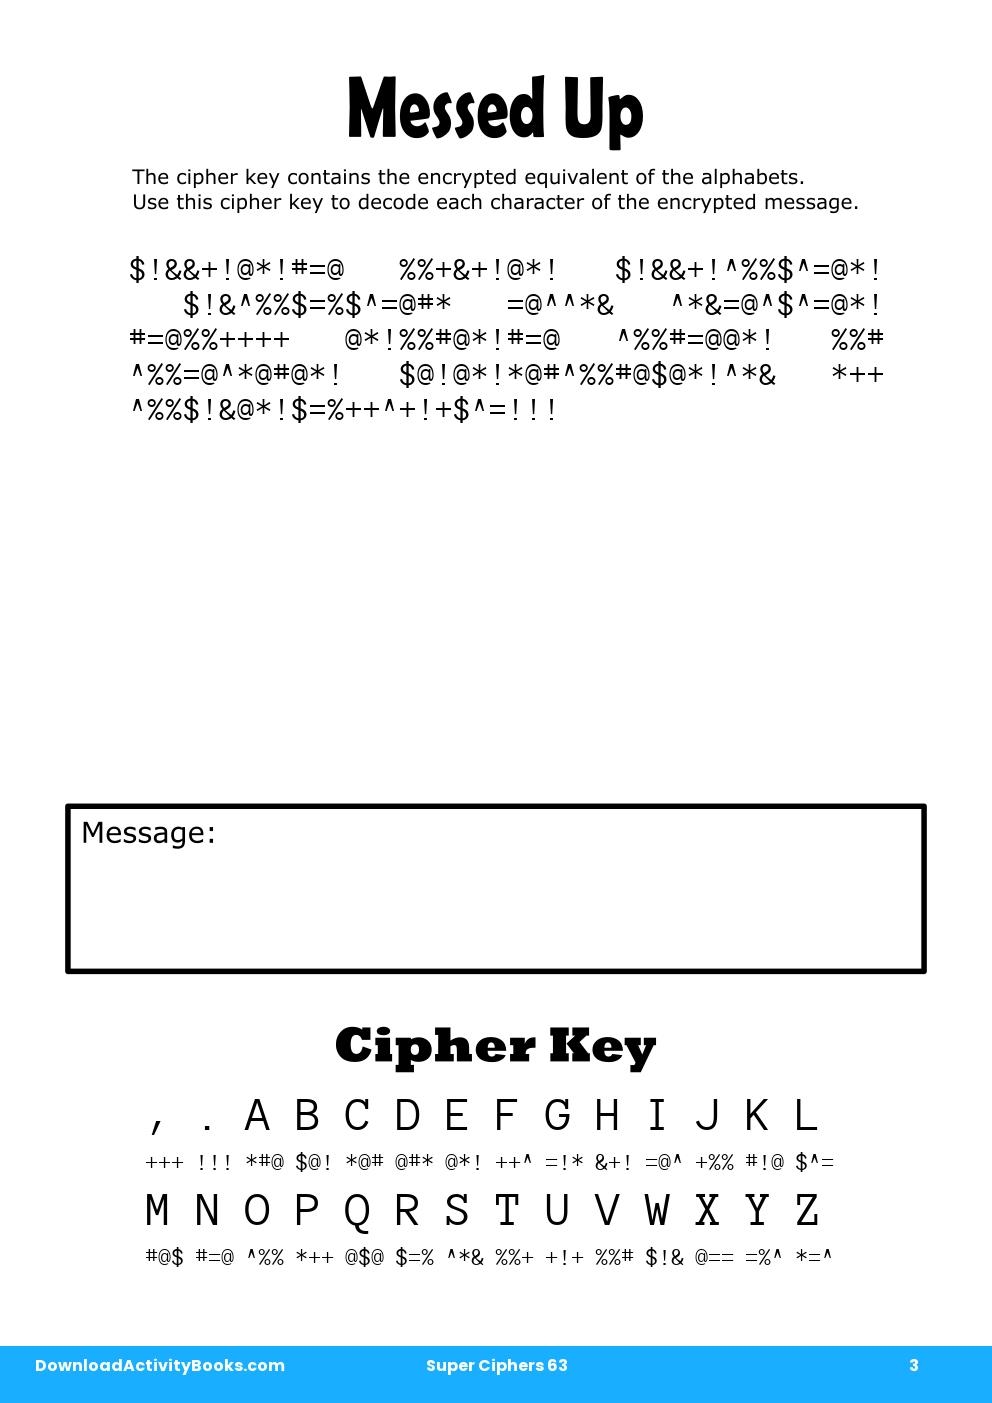 Messed Up in Super Ciphers 63